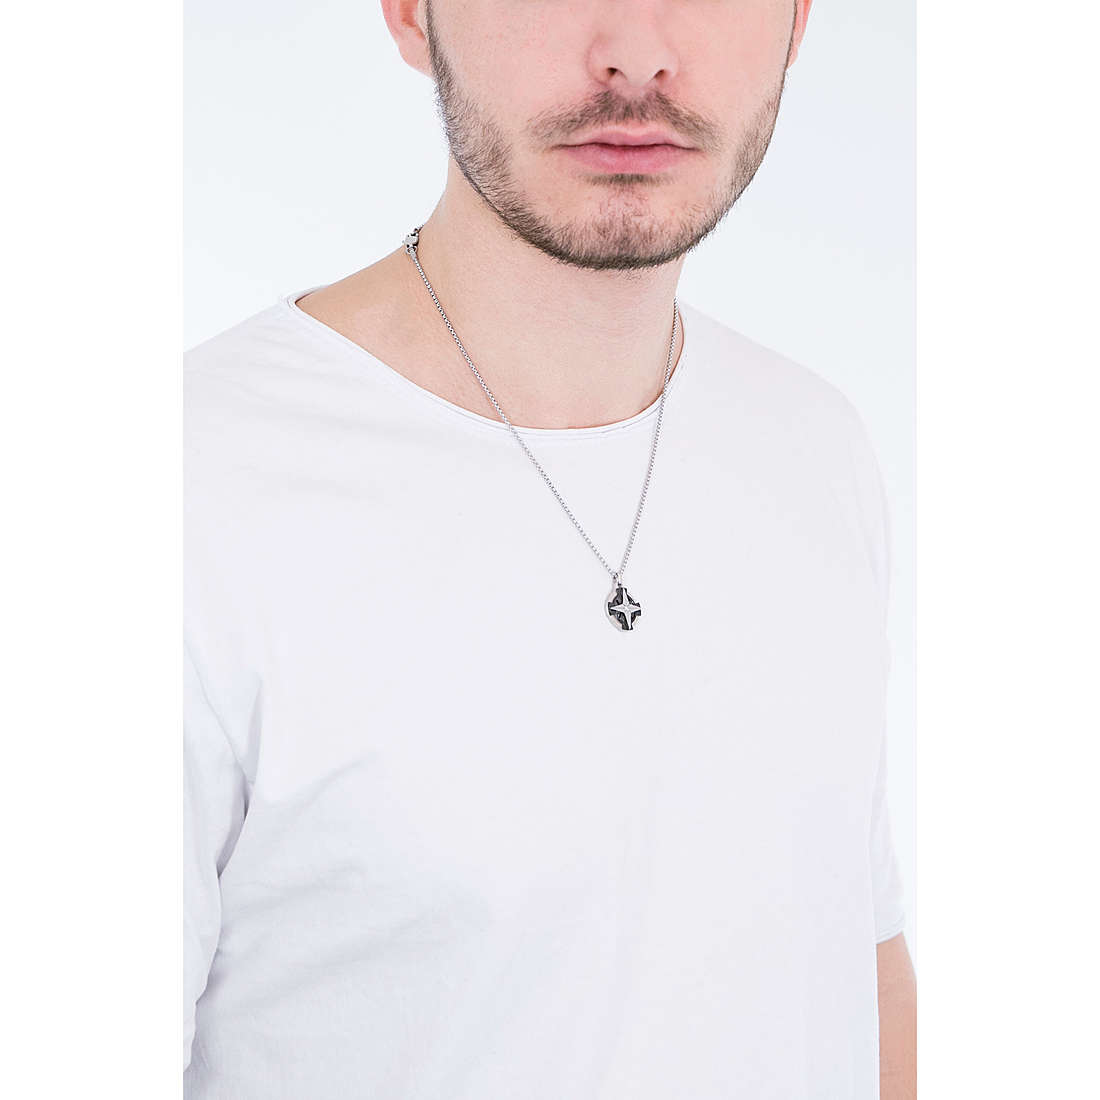 2Jewels colliers Navy homme 251676 Je porte